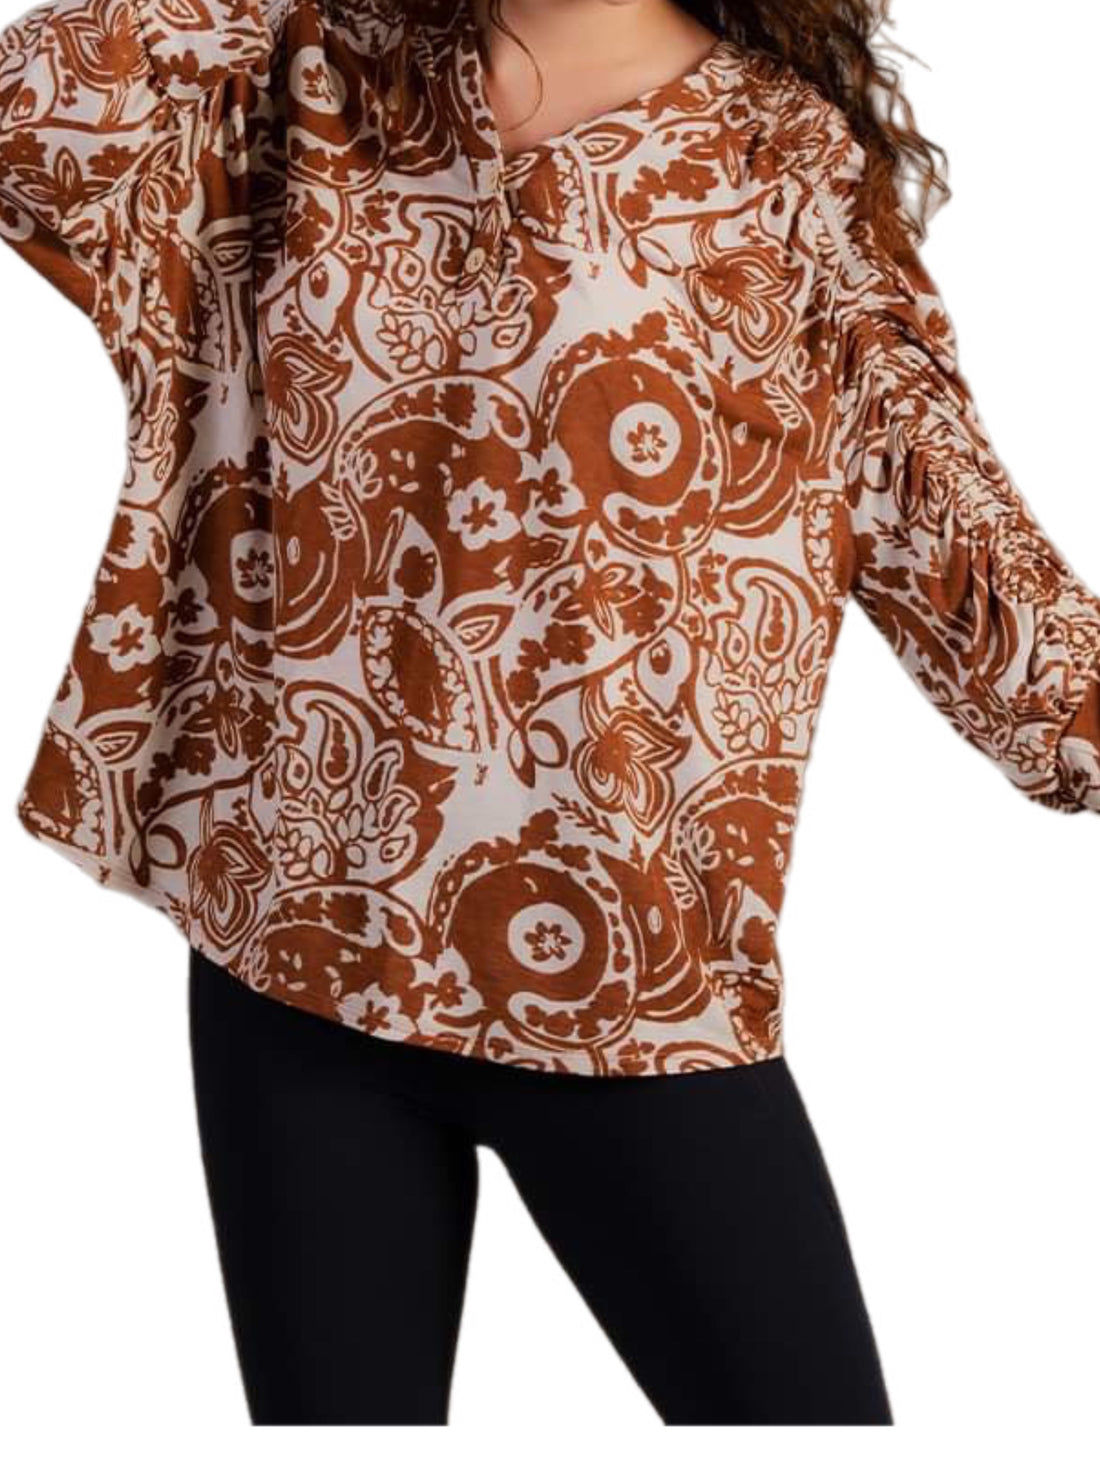 Brown & White Paisley Shirt w/ Ruched Sleeves